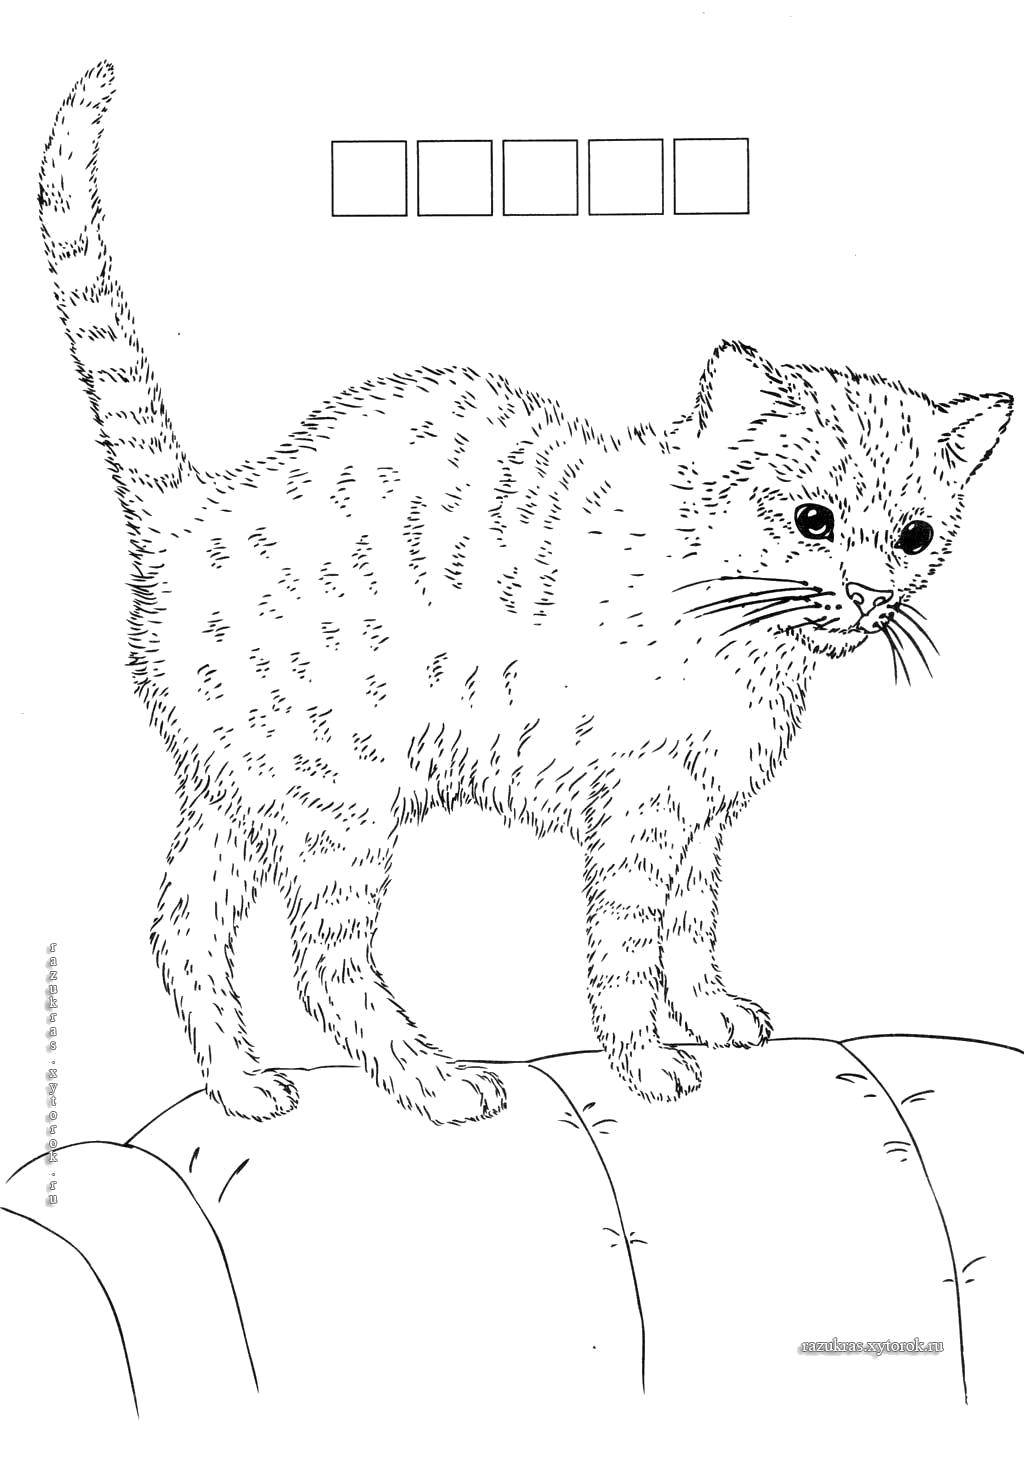 Coloring Home kitty. Category Animals. Tags:  Animals, kitten.